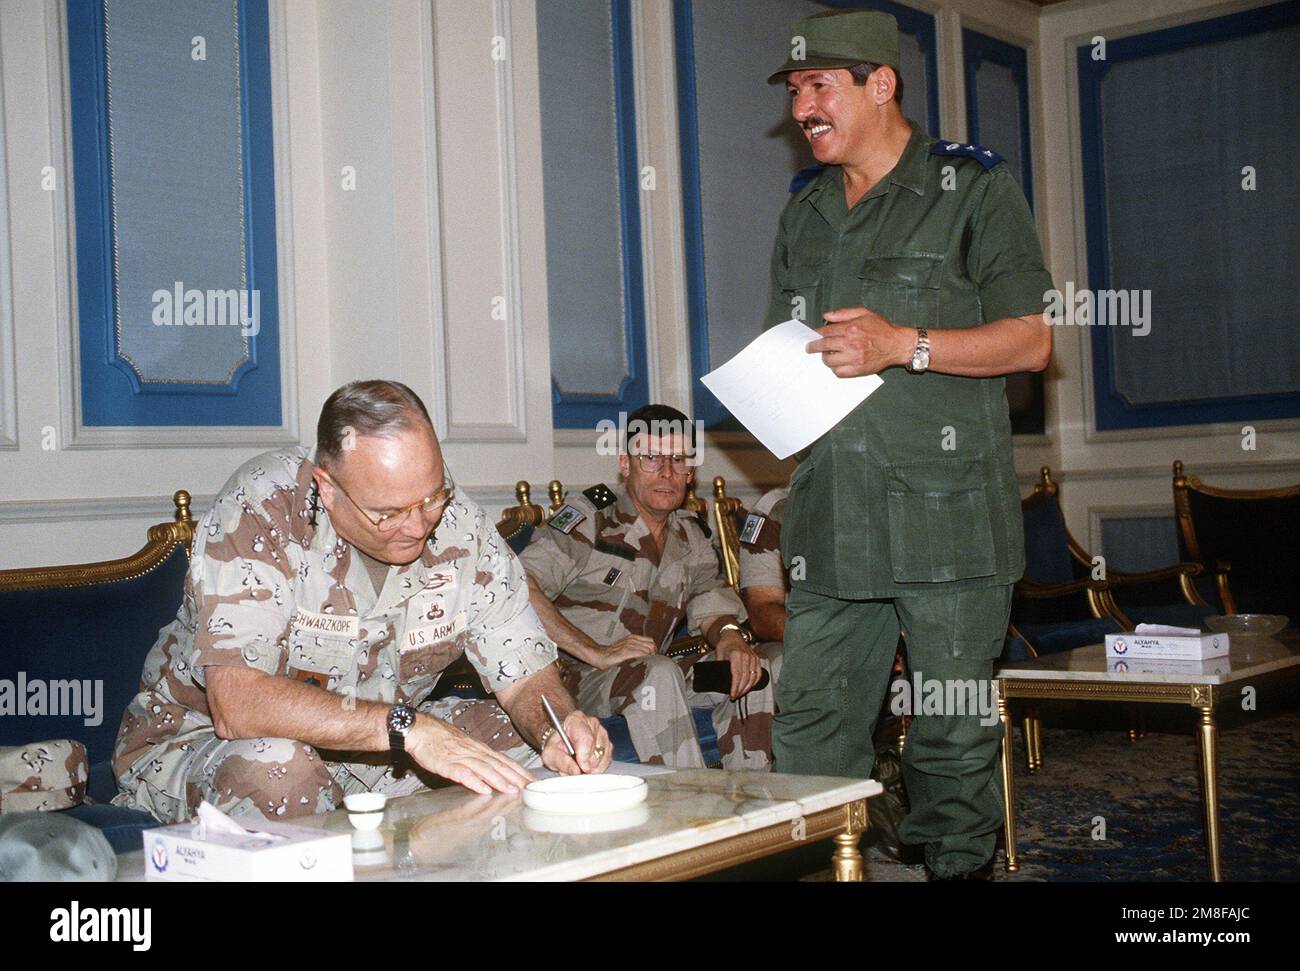 GEN. Norman Schwarzkopf, commander-in-chief, U.S. Central Command, pauses to sign an autograph for a Saudi officer while having tea with LT. GEN. Khalid Bin Sultan Bin Abdul Aziz, commander of Arab forces. Schwarzkopf is visiting coalition forces stationed at Riyadh Air Base in the aftermath of Operation Desert Storm. Subject Operation/Series: DESERT STORM Country: Saudi Arabia(SAU) Stock Photo